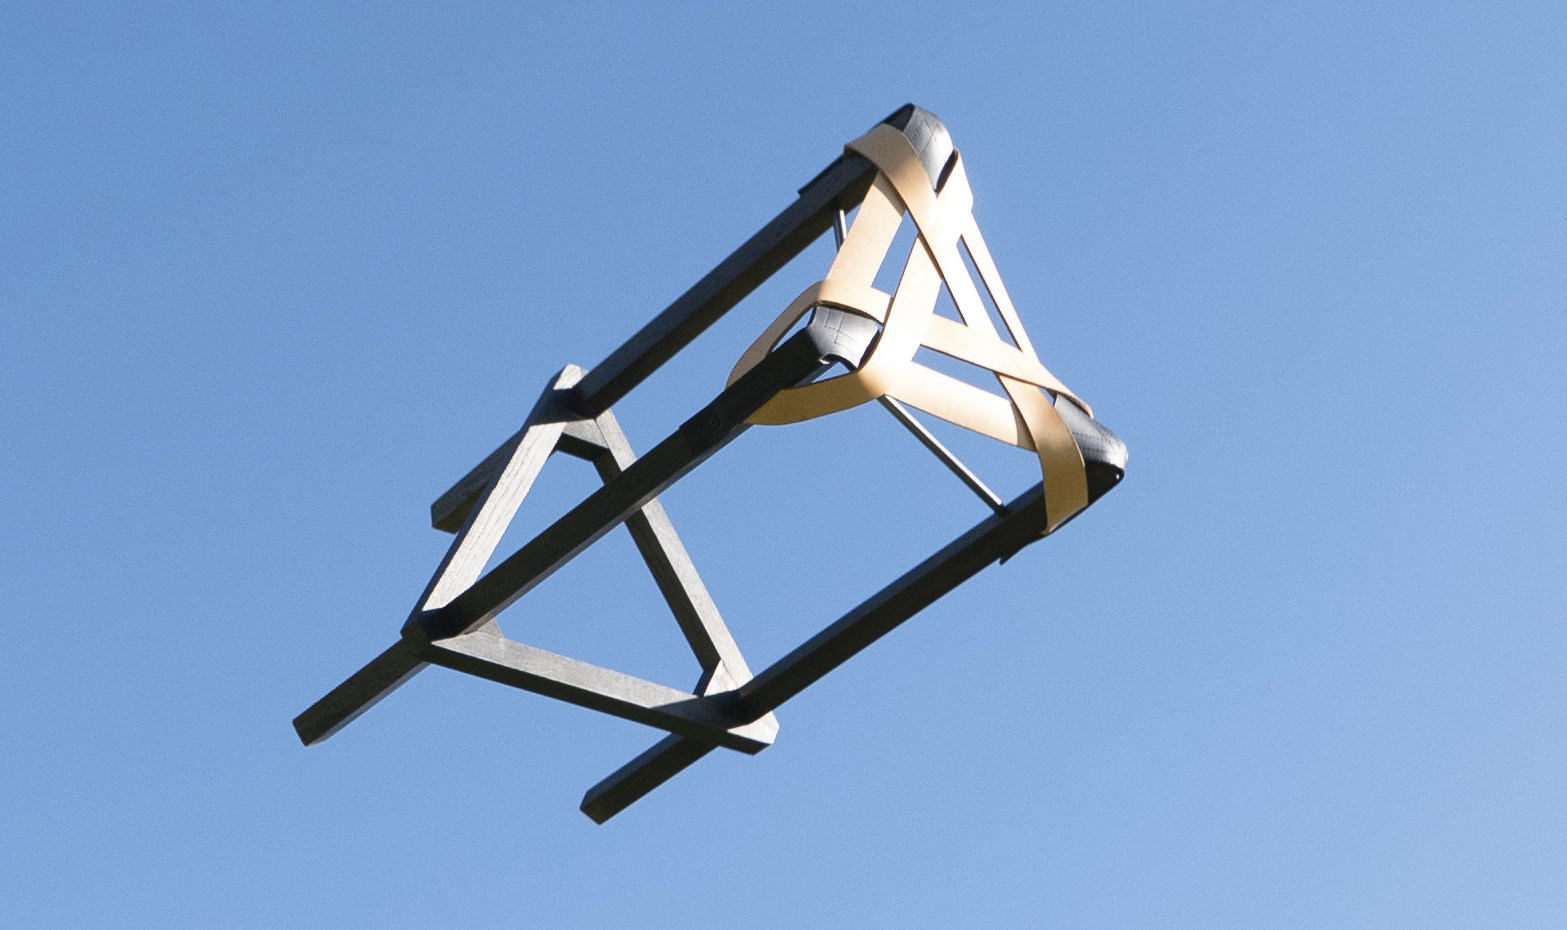 Saddle bar stool tossed in air with blue sky behind